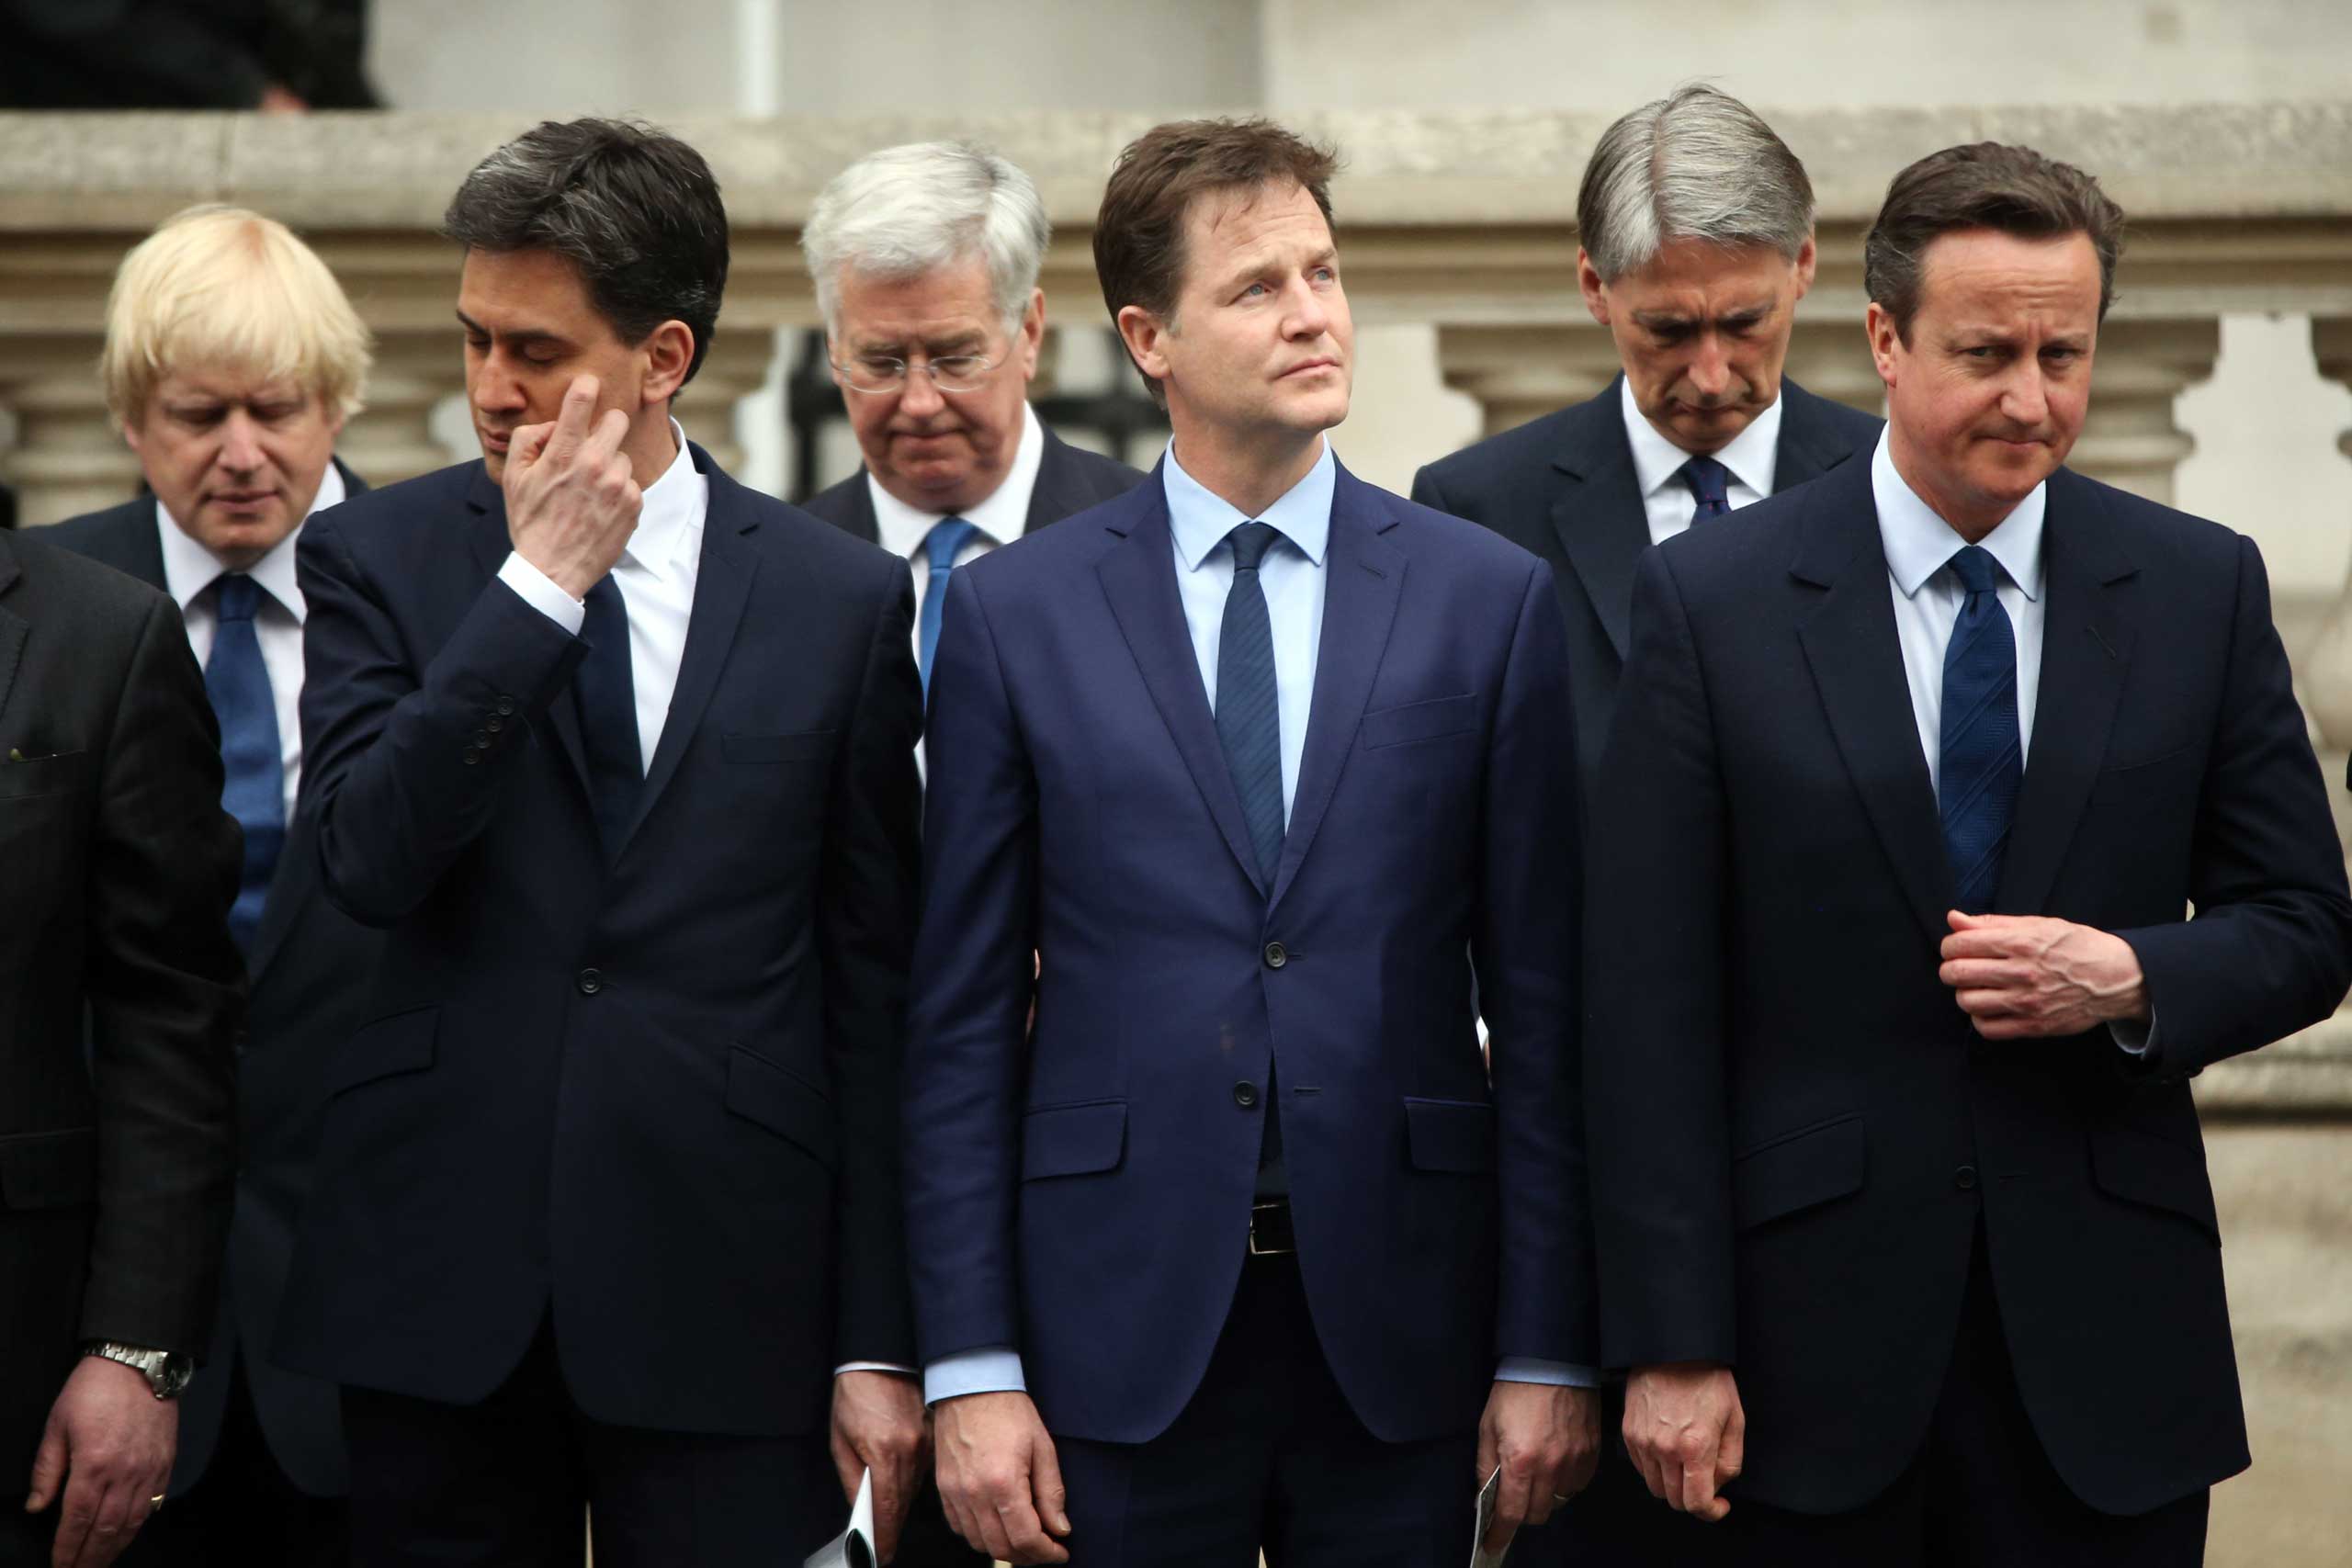 Labour Party leader Ed Miliband, Liberal Democrat leader Nick Clegg and Prime Minister David Cameron stand during a tribute at the Cenotaph to begin three days of national commemorations to mark the 70th anniversary of VE Day on May 8, 2015 in London. (Christopher Furlong—Getty Images)